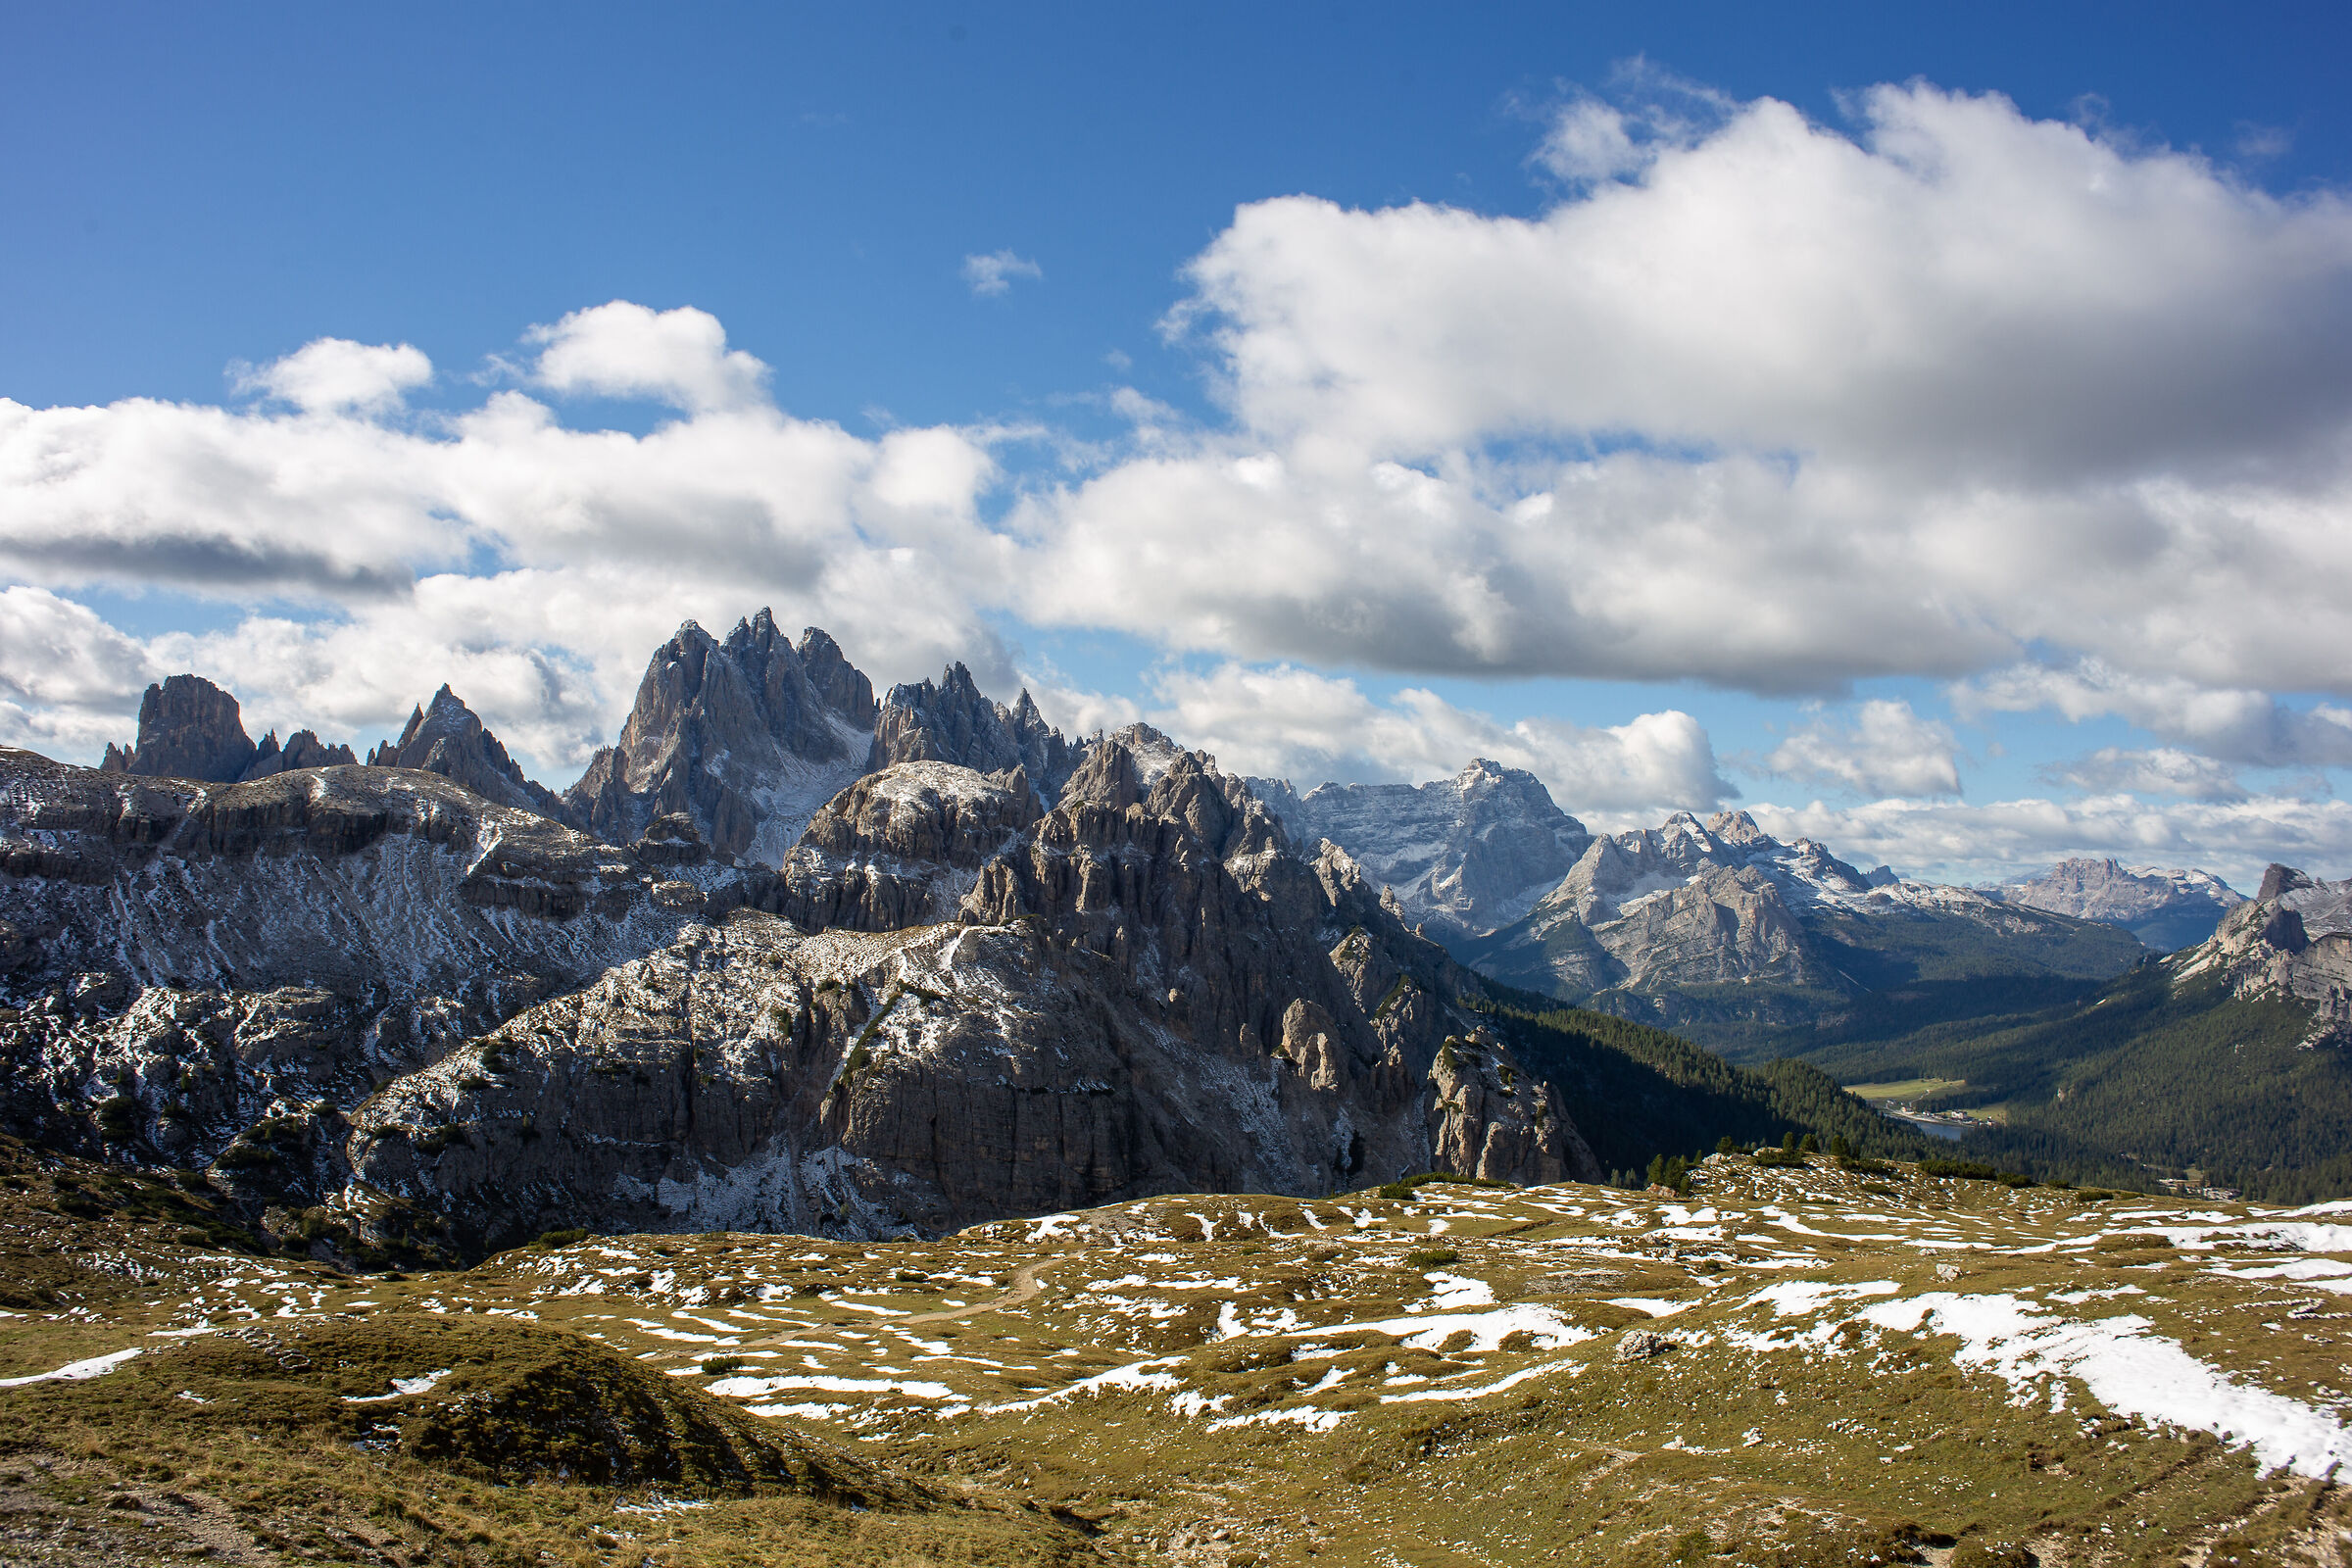 View from the Three Peaks of Lavaredo...